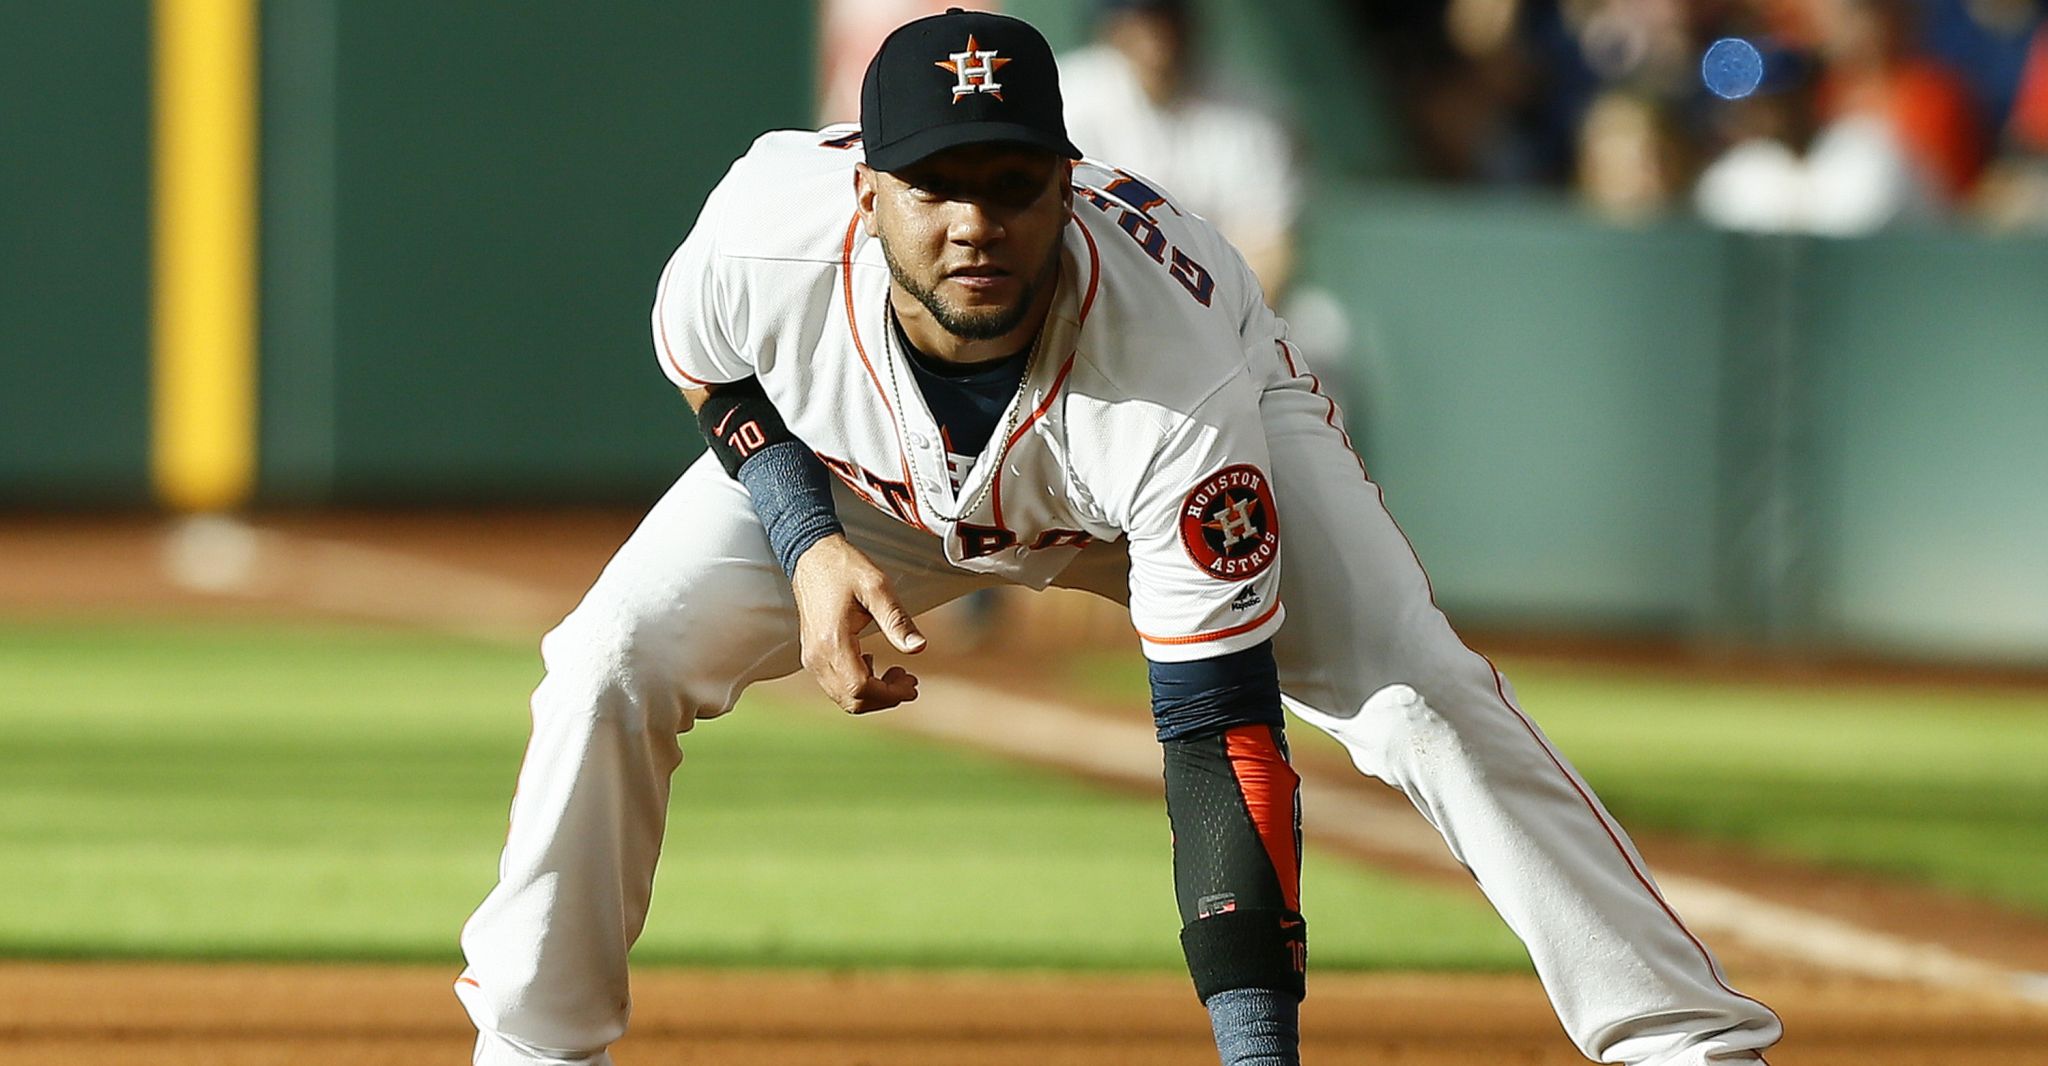 Astros' Yuli Gurriel showing adept ability to scoop at first base